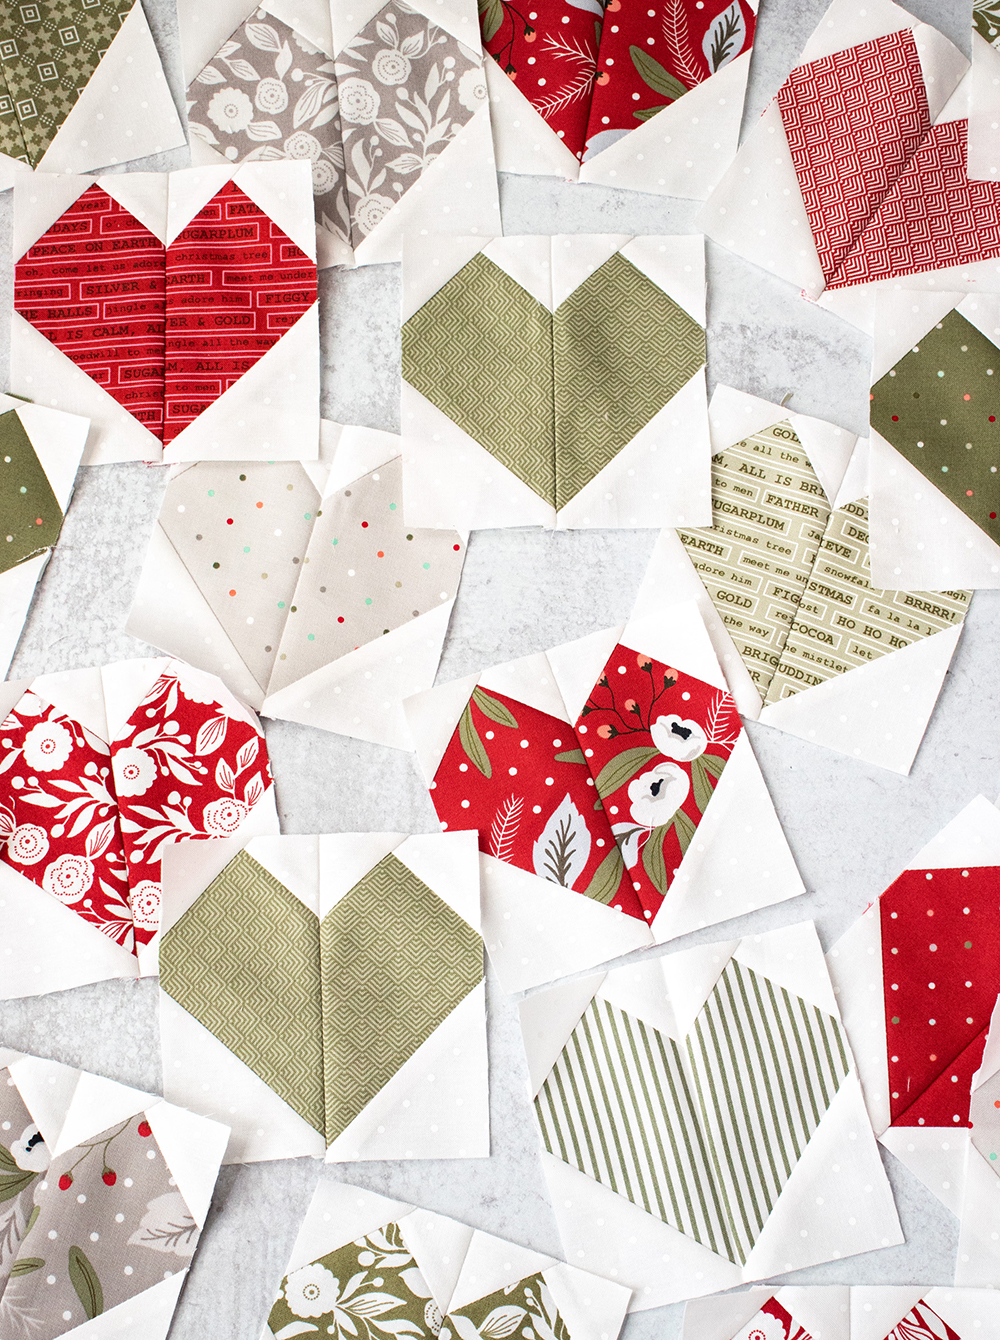 Heart blocks from the Lovey Dovey quilt pattern. Fabric is Christmas Morning by Lella Boutique for Moda Fabrics.